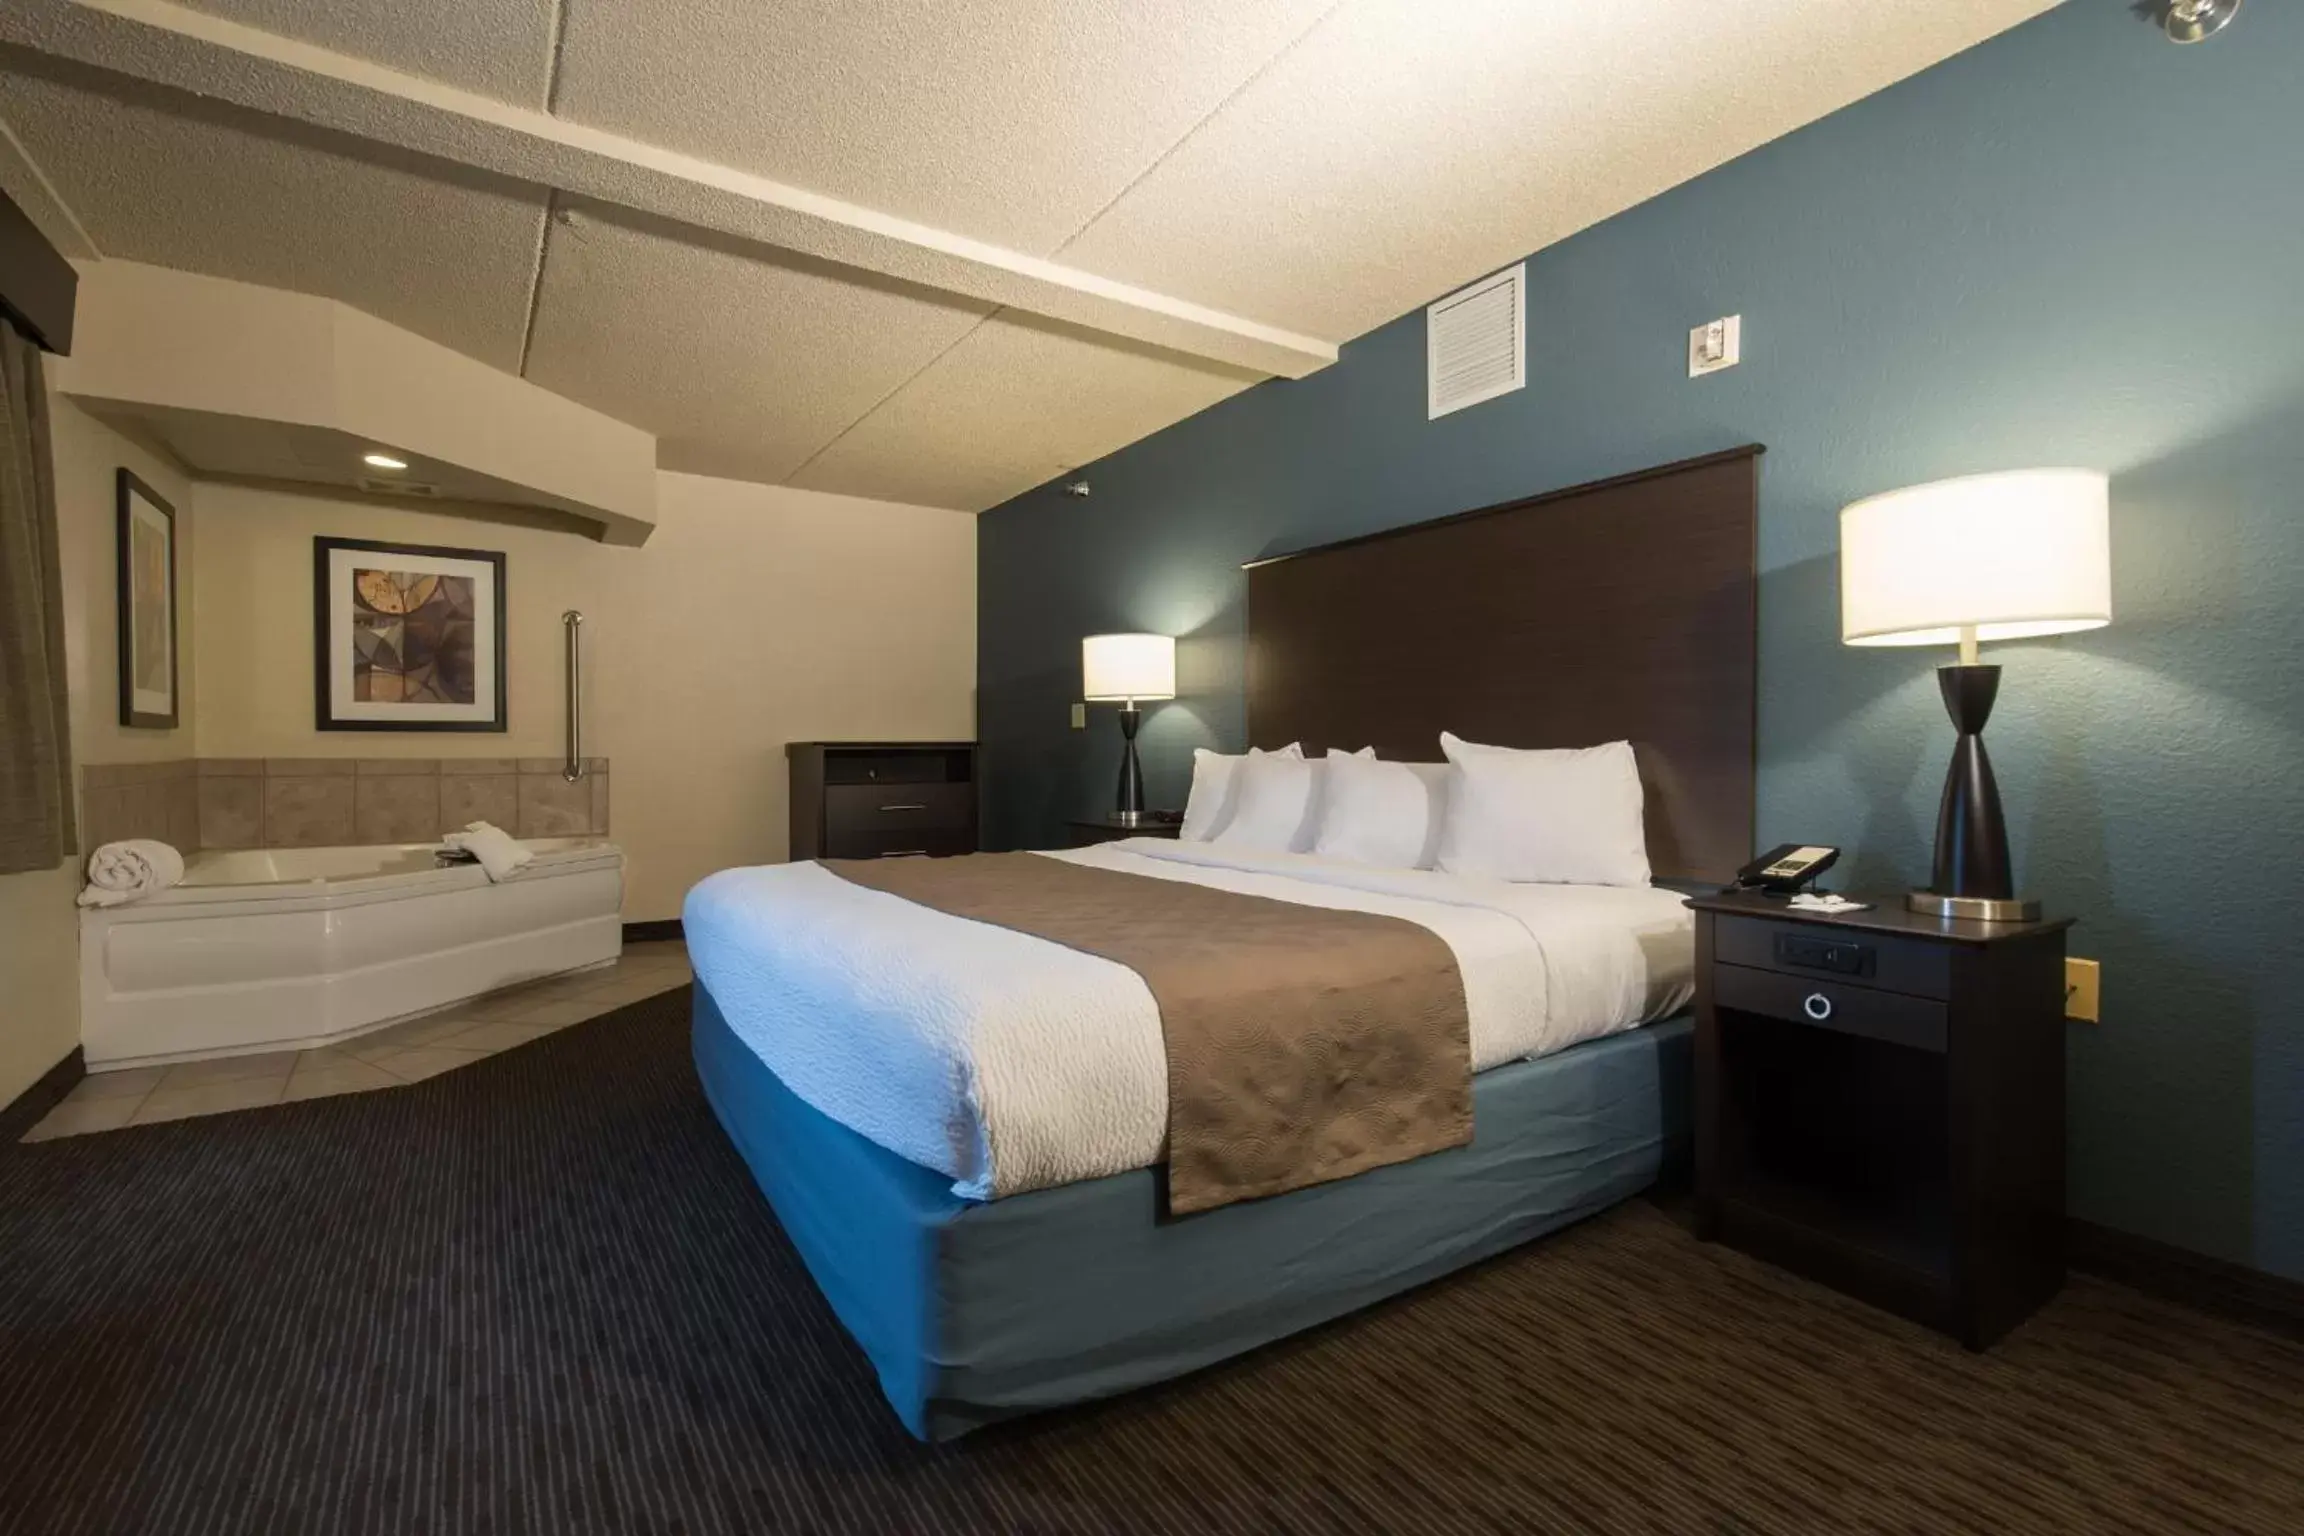 Hot Tub, Bed in AmericInn by Wyndham Mounds View Minneapolis